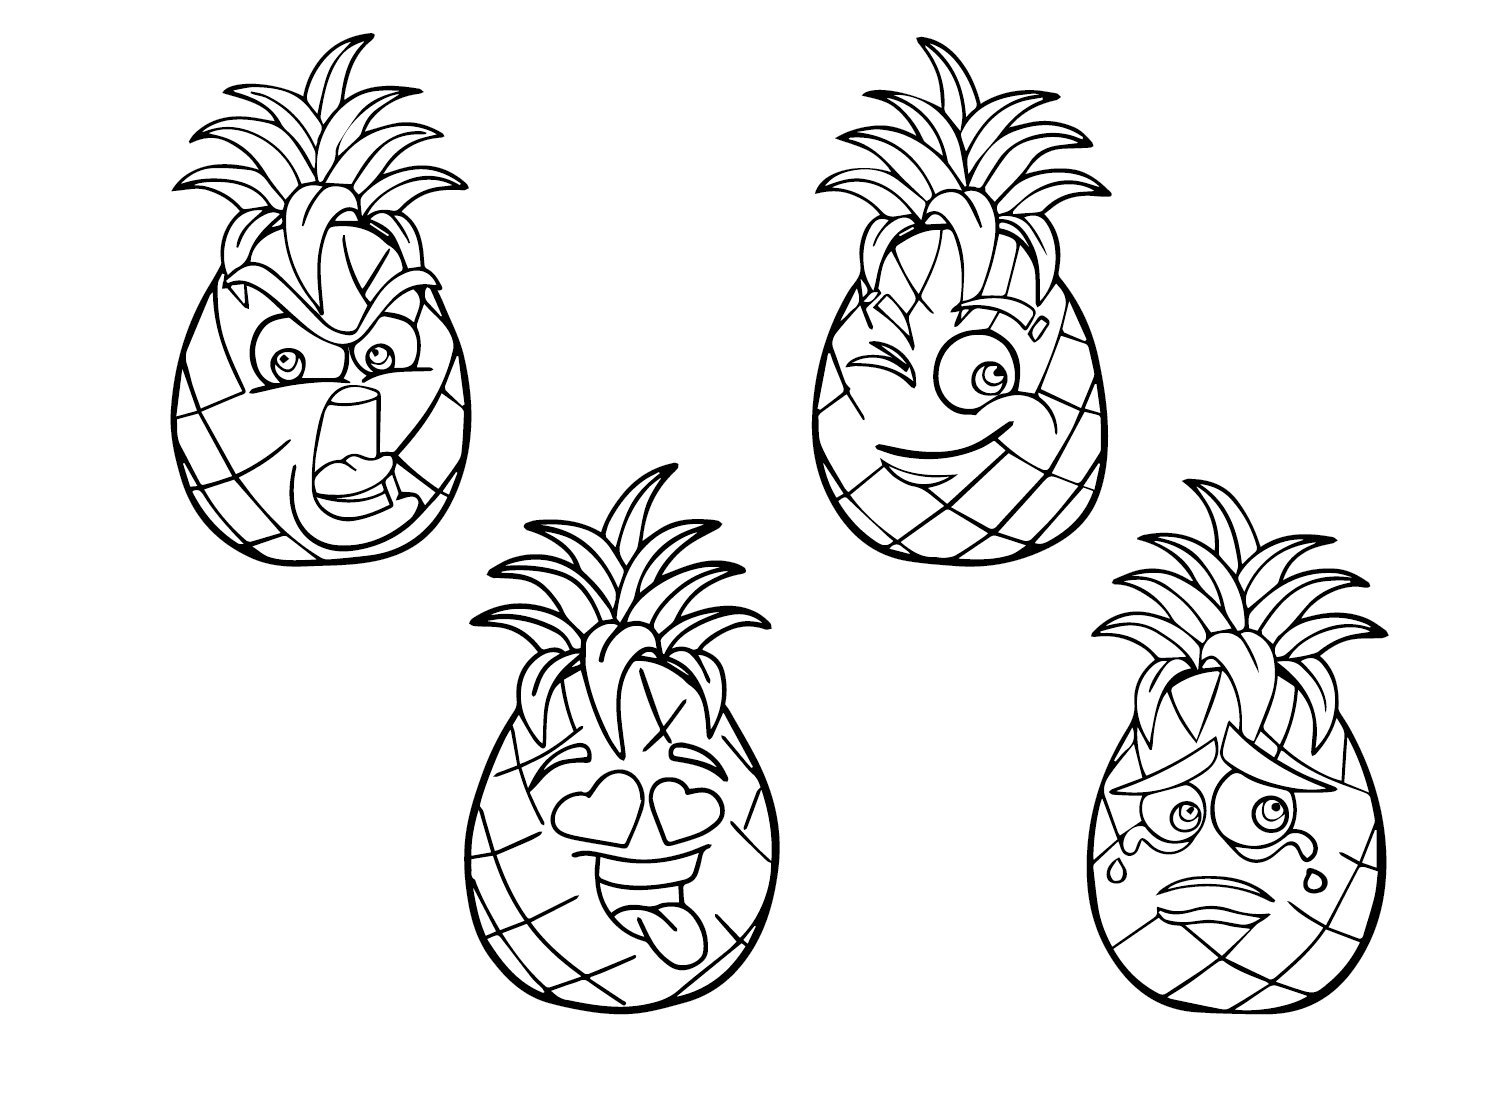 Pineapples Cartoon Character from Pineapples